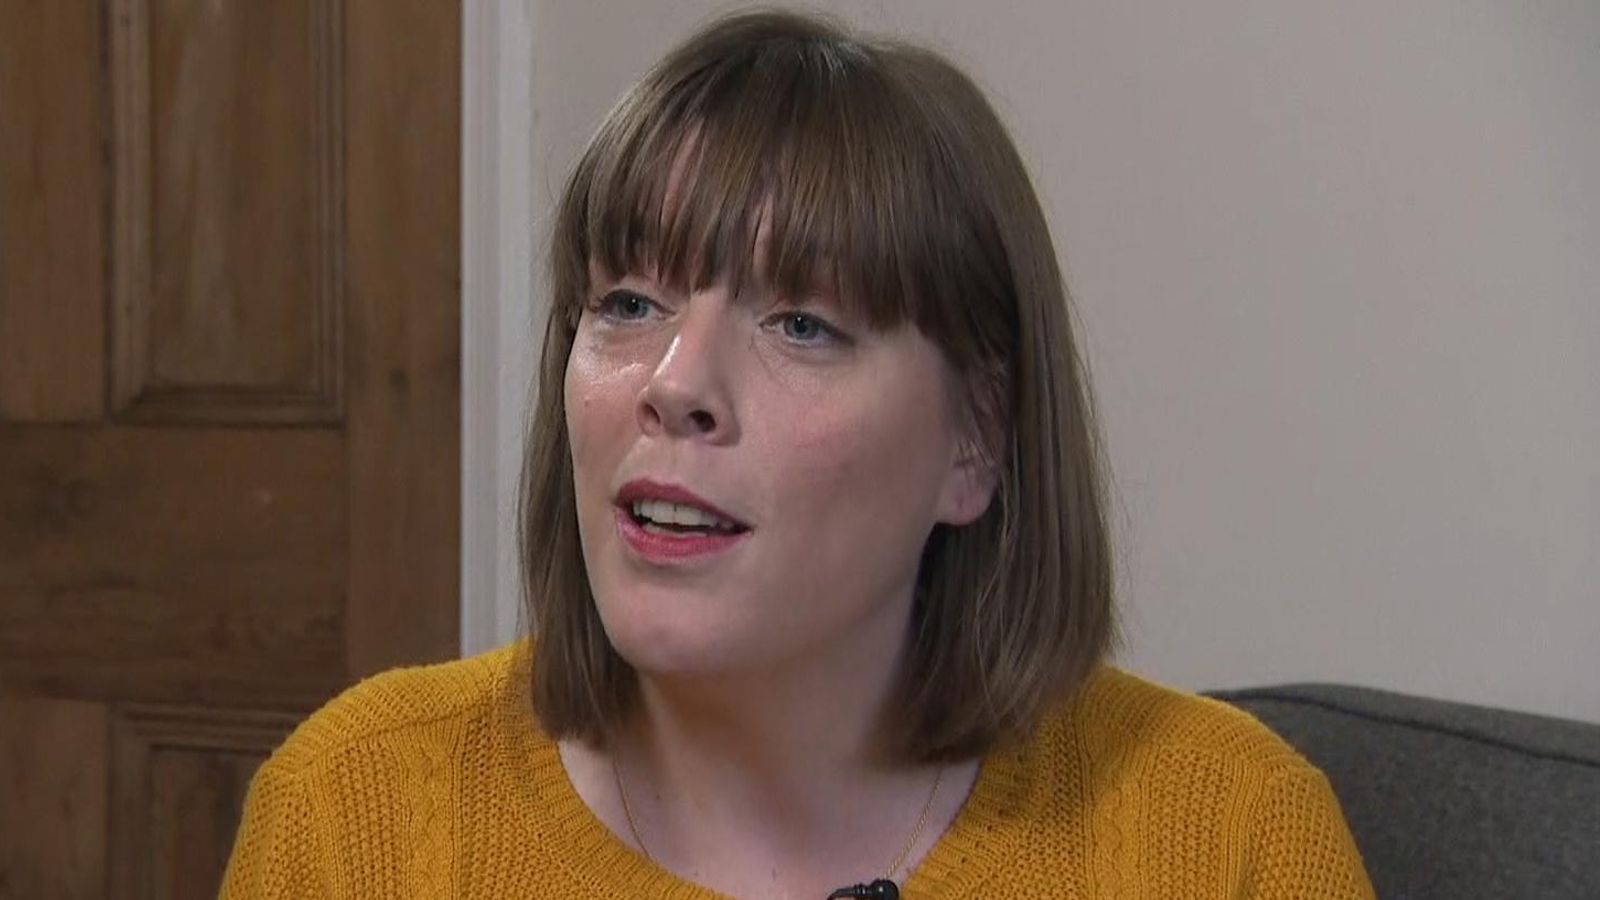 Jess Phillips is not racist, says Labour frontbencher after accusations by Katharine Birbalsingh